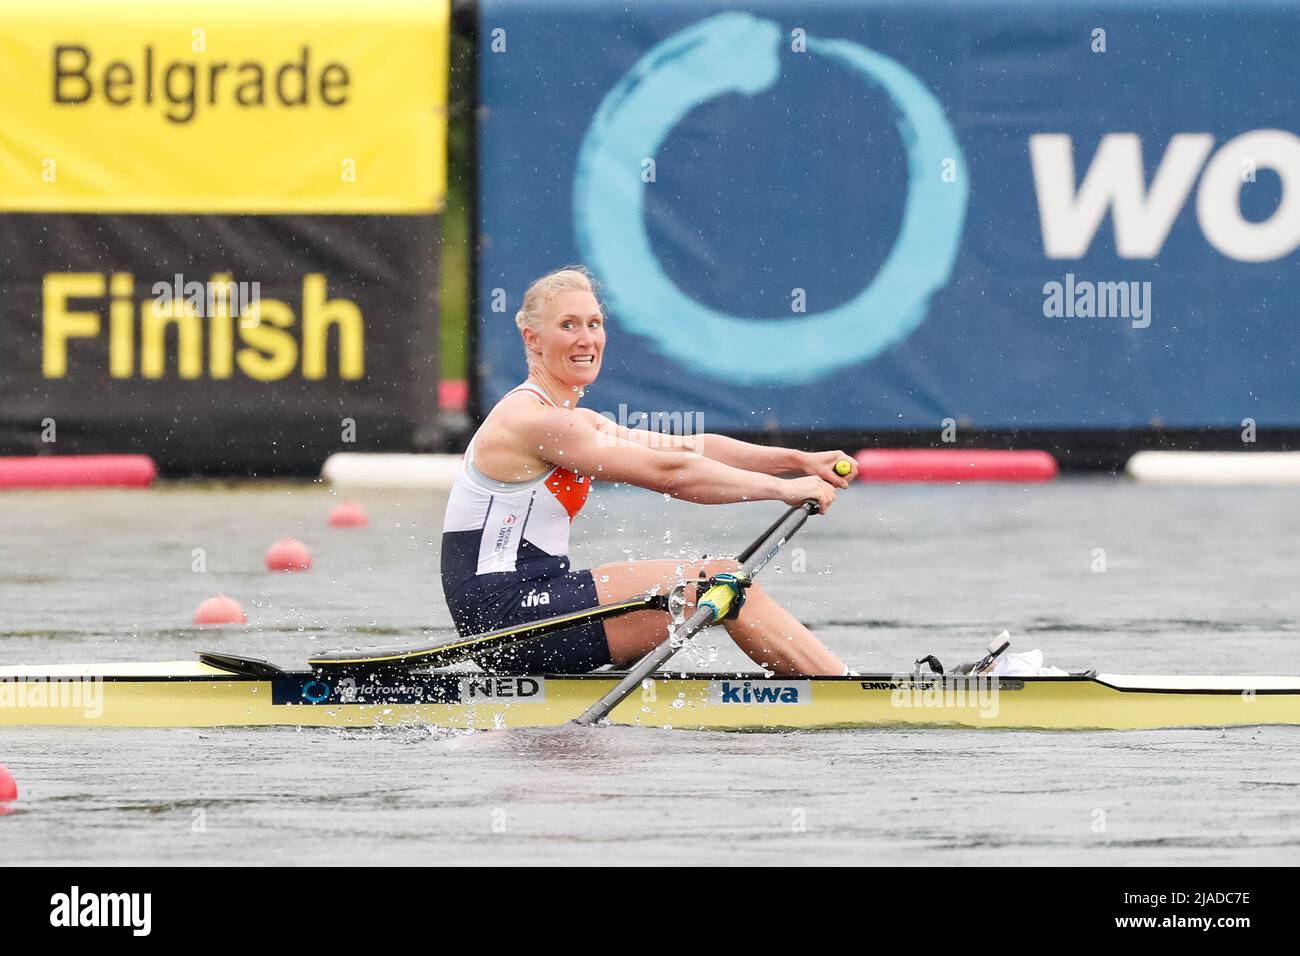 BELGRADE, SERBIA - MAY 29: Lisa Scheenaard of the Netherlands competing in the Women's Single Sculls Final B during the World Rowing Cup at the Sava Lake on May 29, 2022 in Belgrade, Serbia (Photo by Nikola Krstic/Orange Pictures) Stock Photo